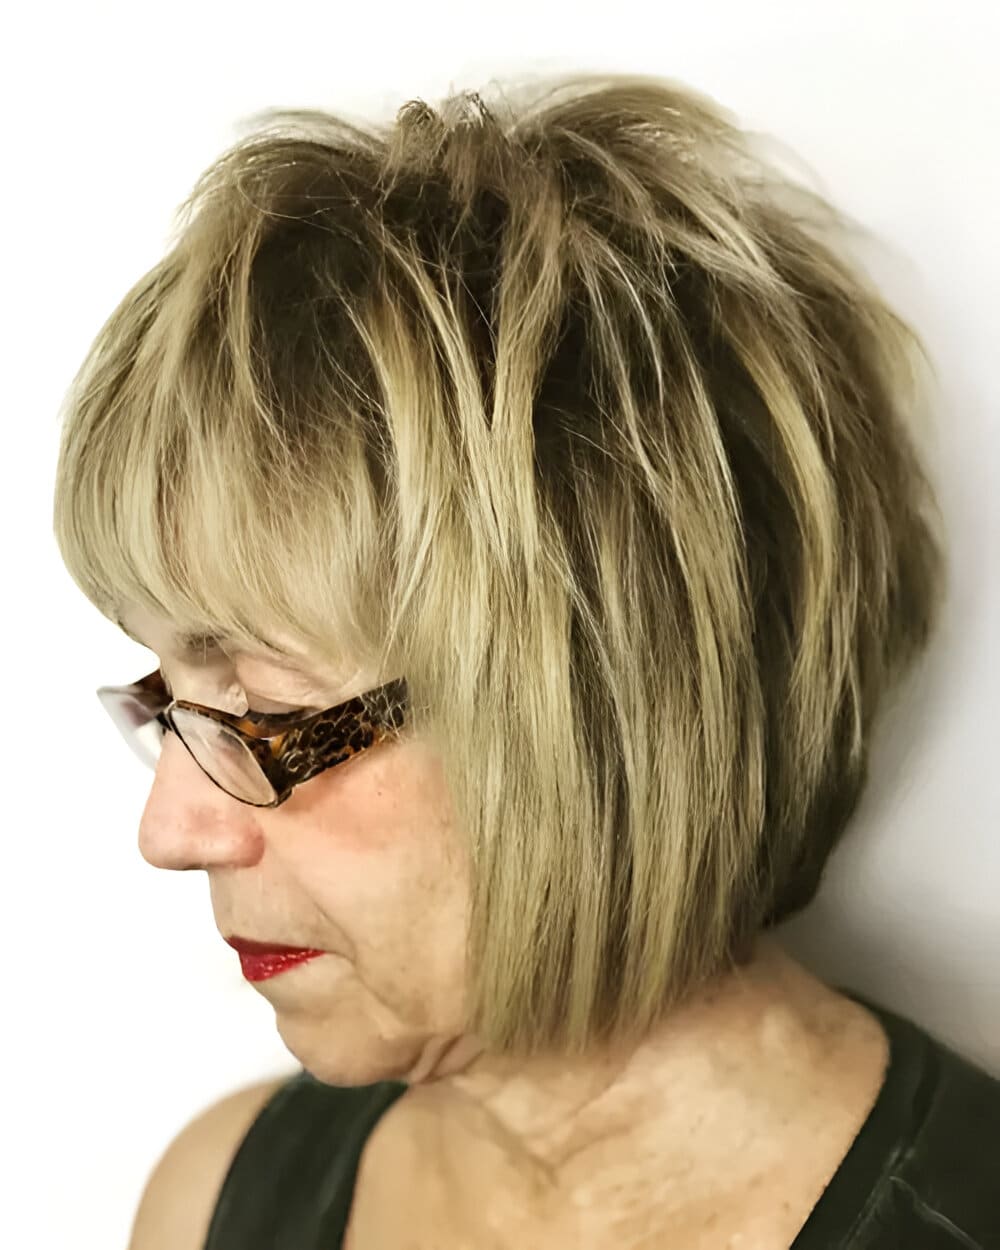 Jaw-length Bob With Short Layers